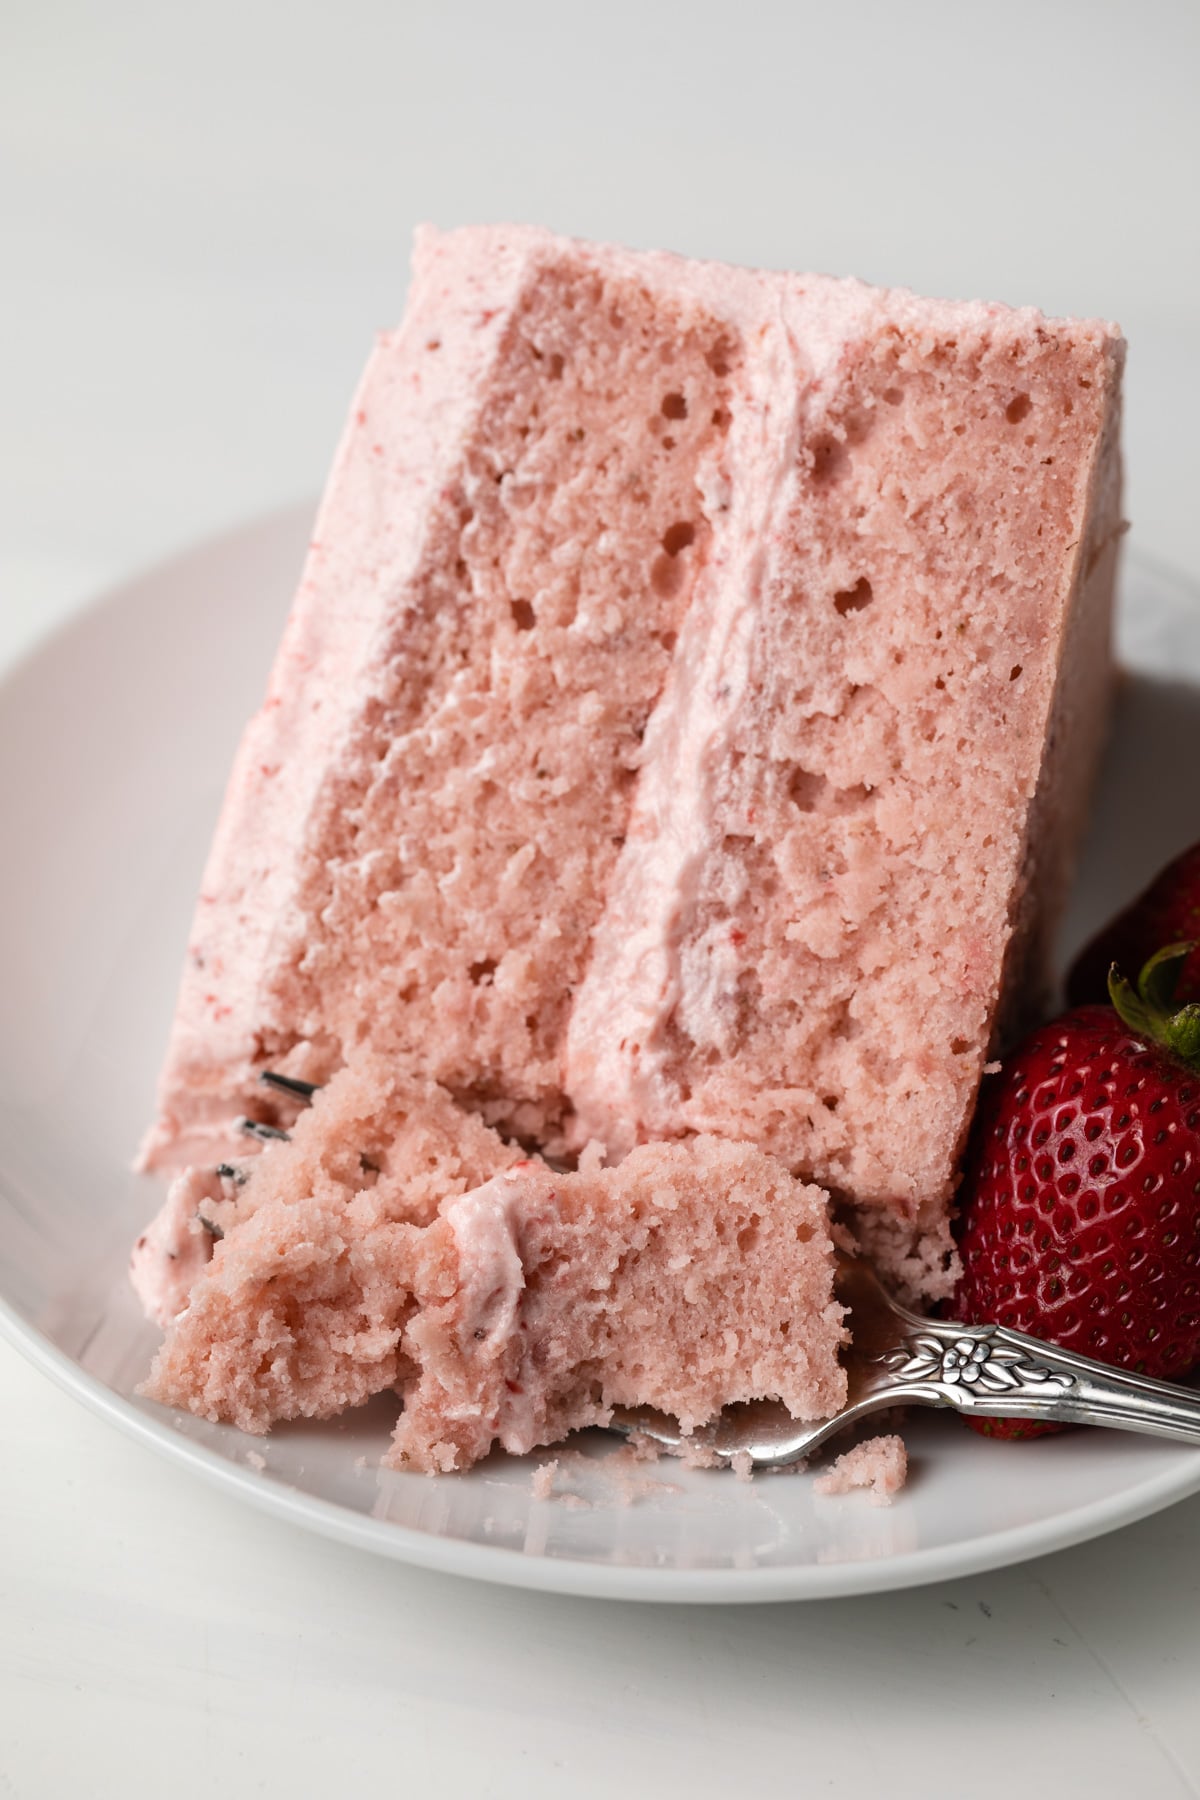 Slice of strawberry cake with fork taking a bite out.